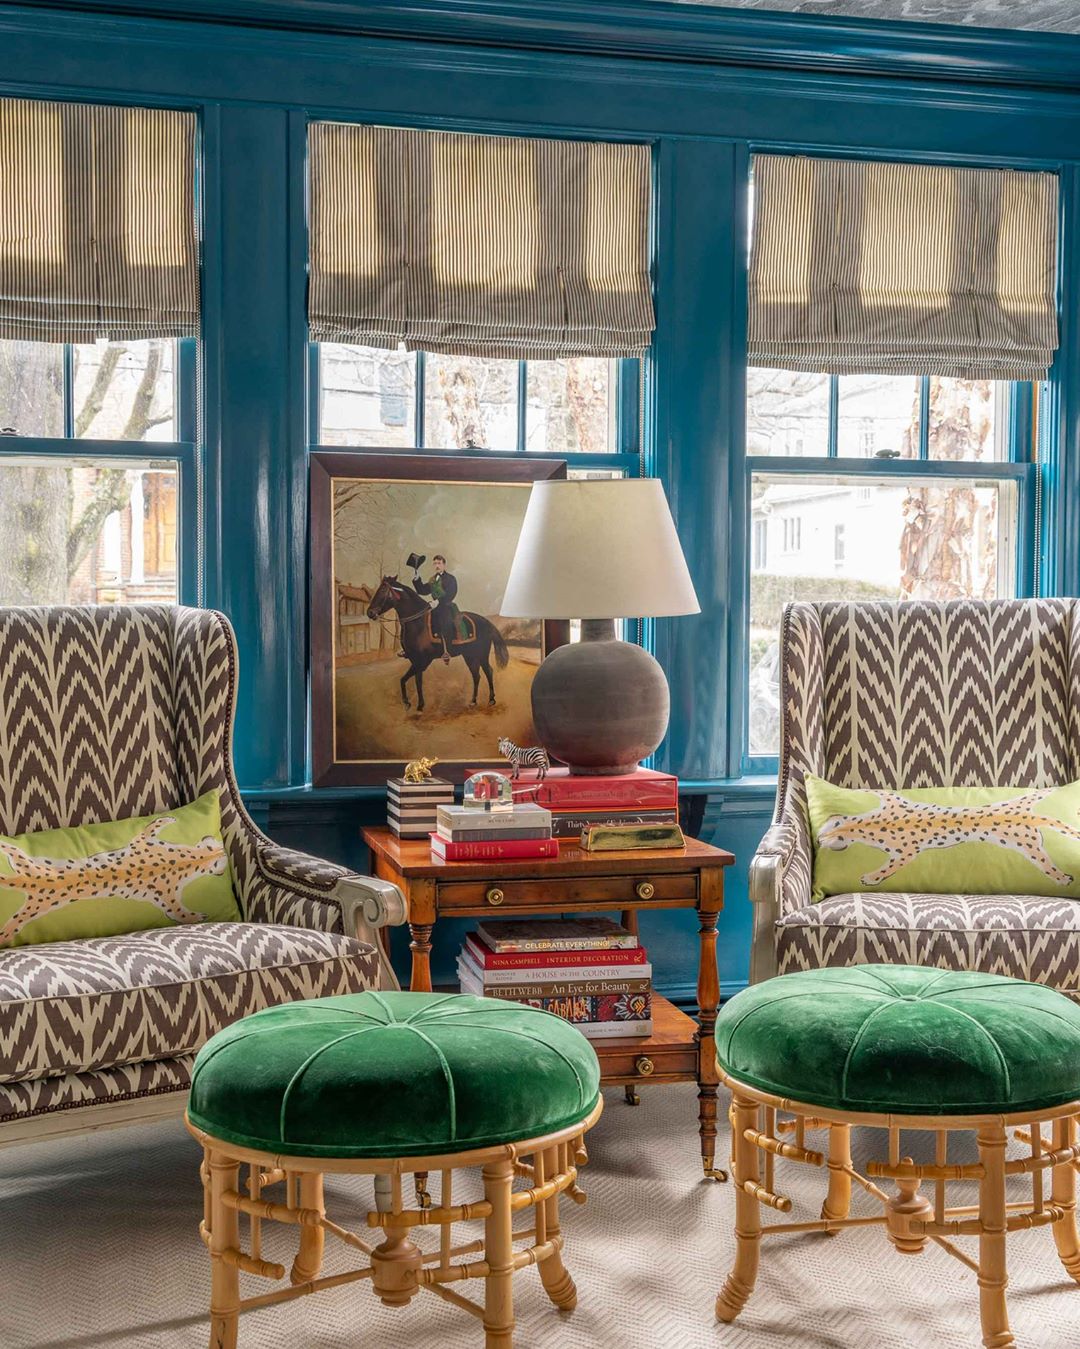 Living room with blue walls and patterned chairs with green stools in Ecelectic design. Photo by Instagram user @lizcaan